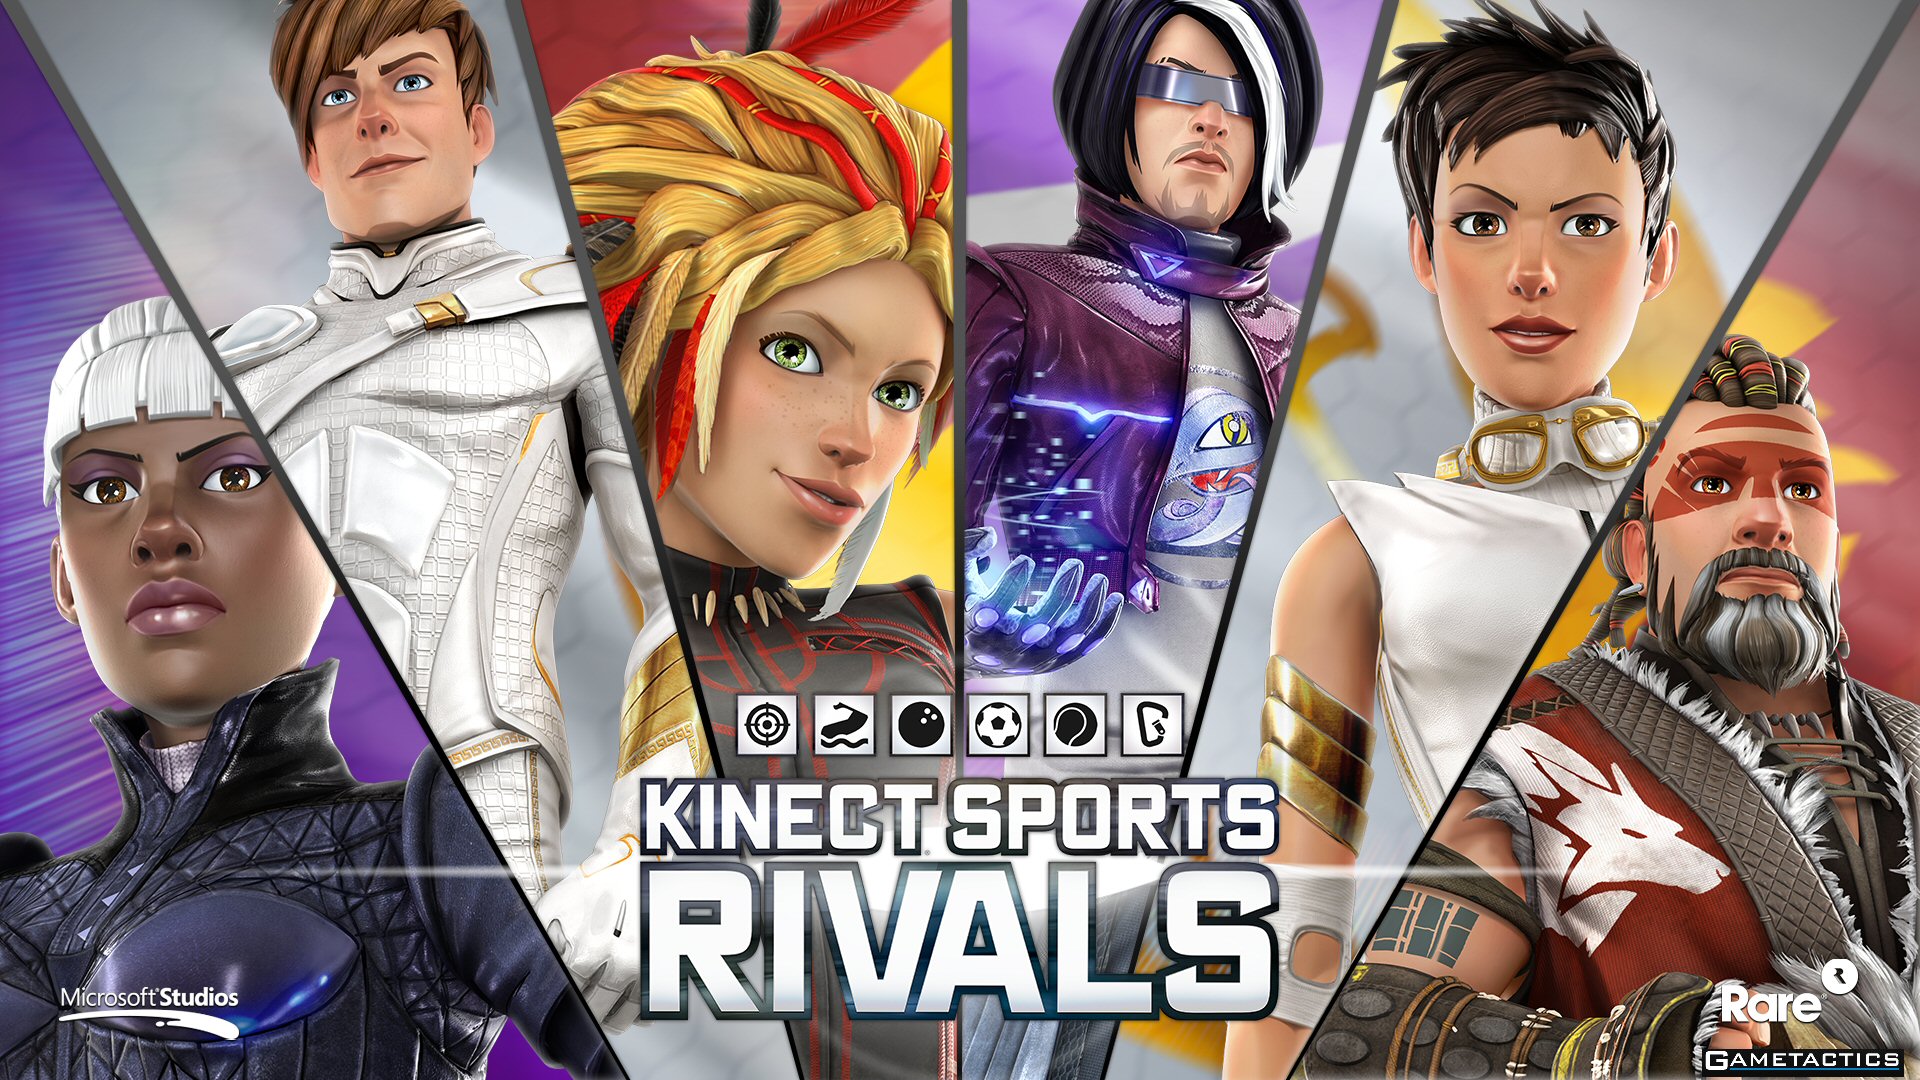 “Kinect Sports Rivals” Launches this April